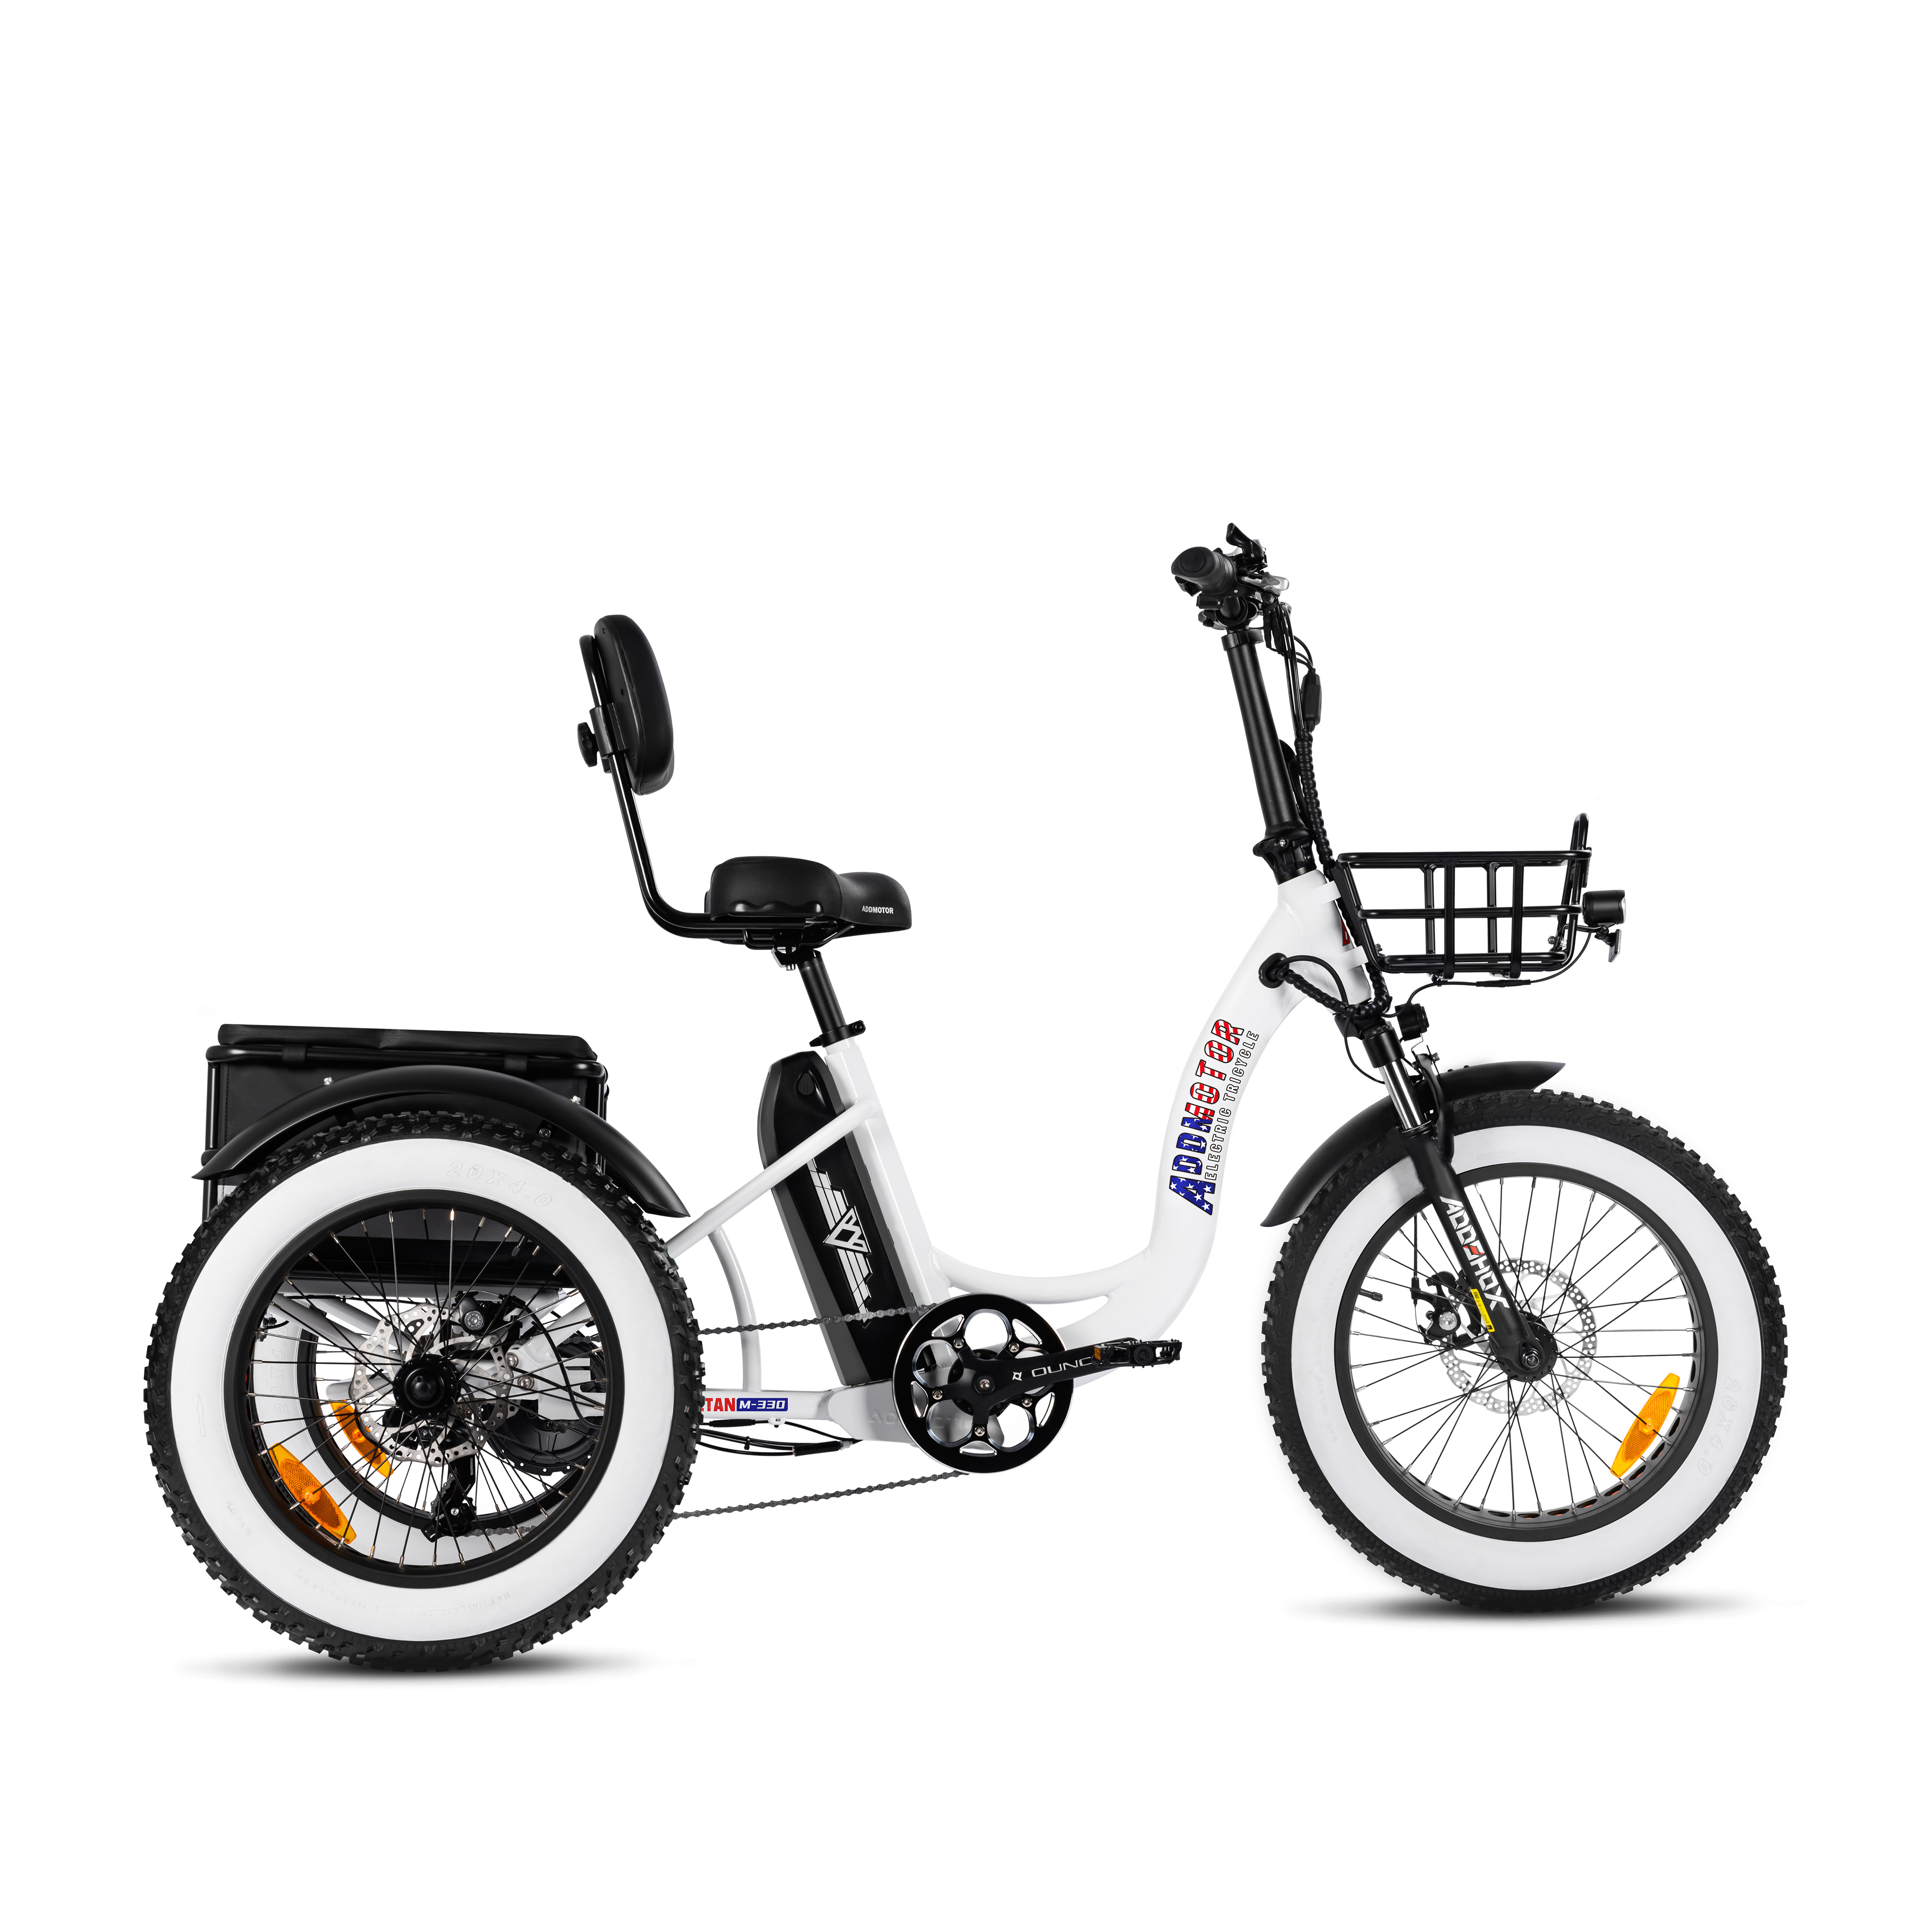 Addmotor Trike M-330 II Fat Tire Electric Trikes for Adults, 750W Rear-Mounted Motor, 350lbs Payload Capacity, Pearl White